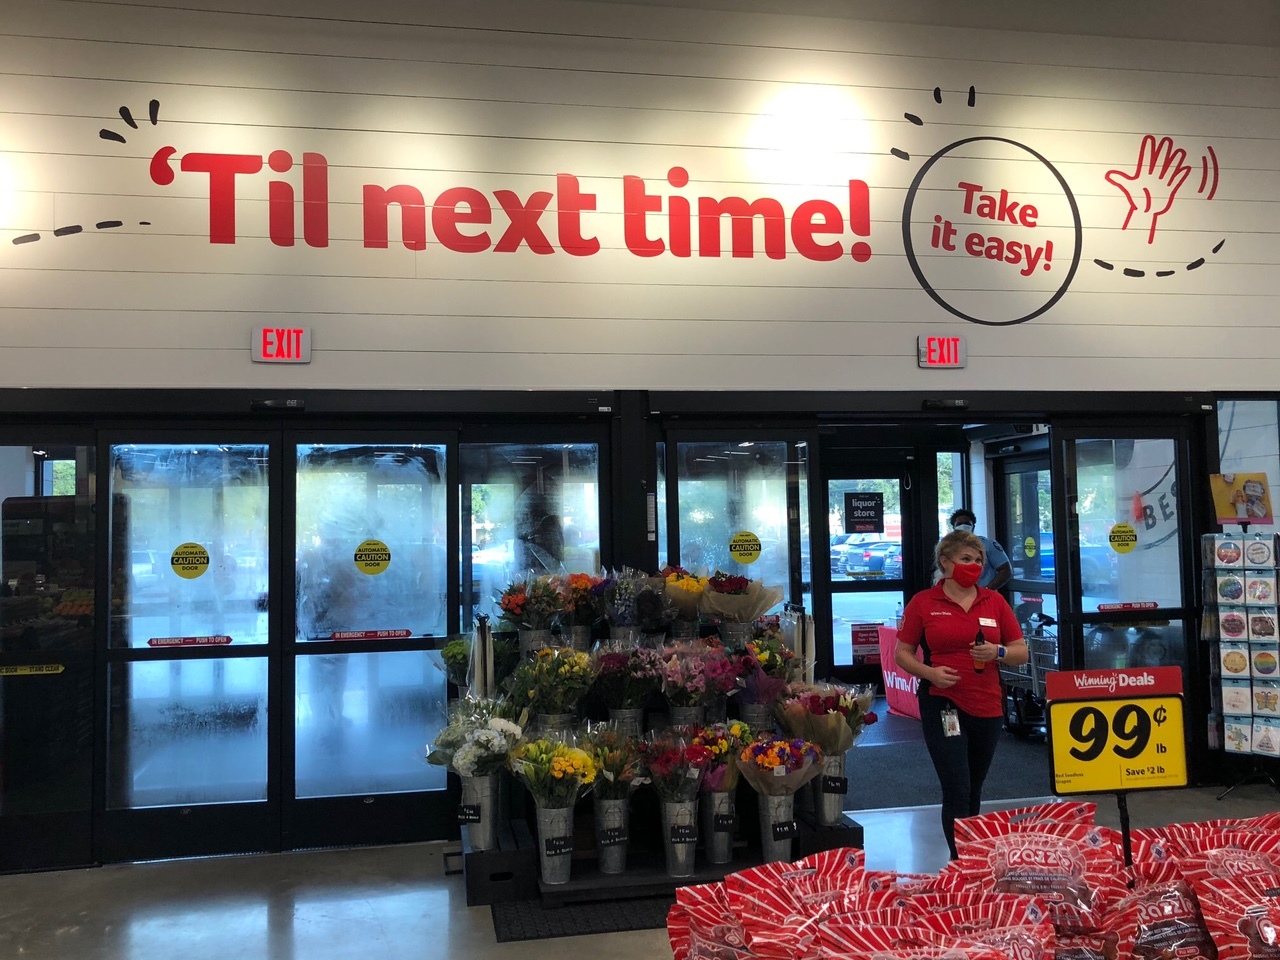 On the way out, shoppers get one last sign to read.